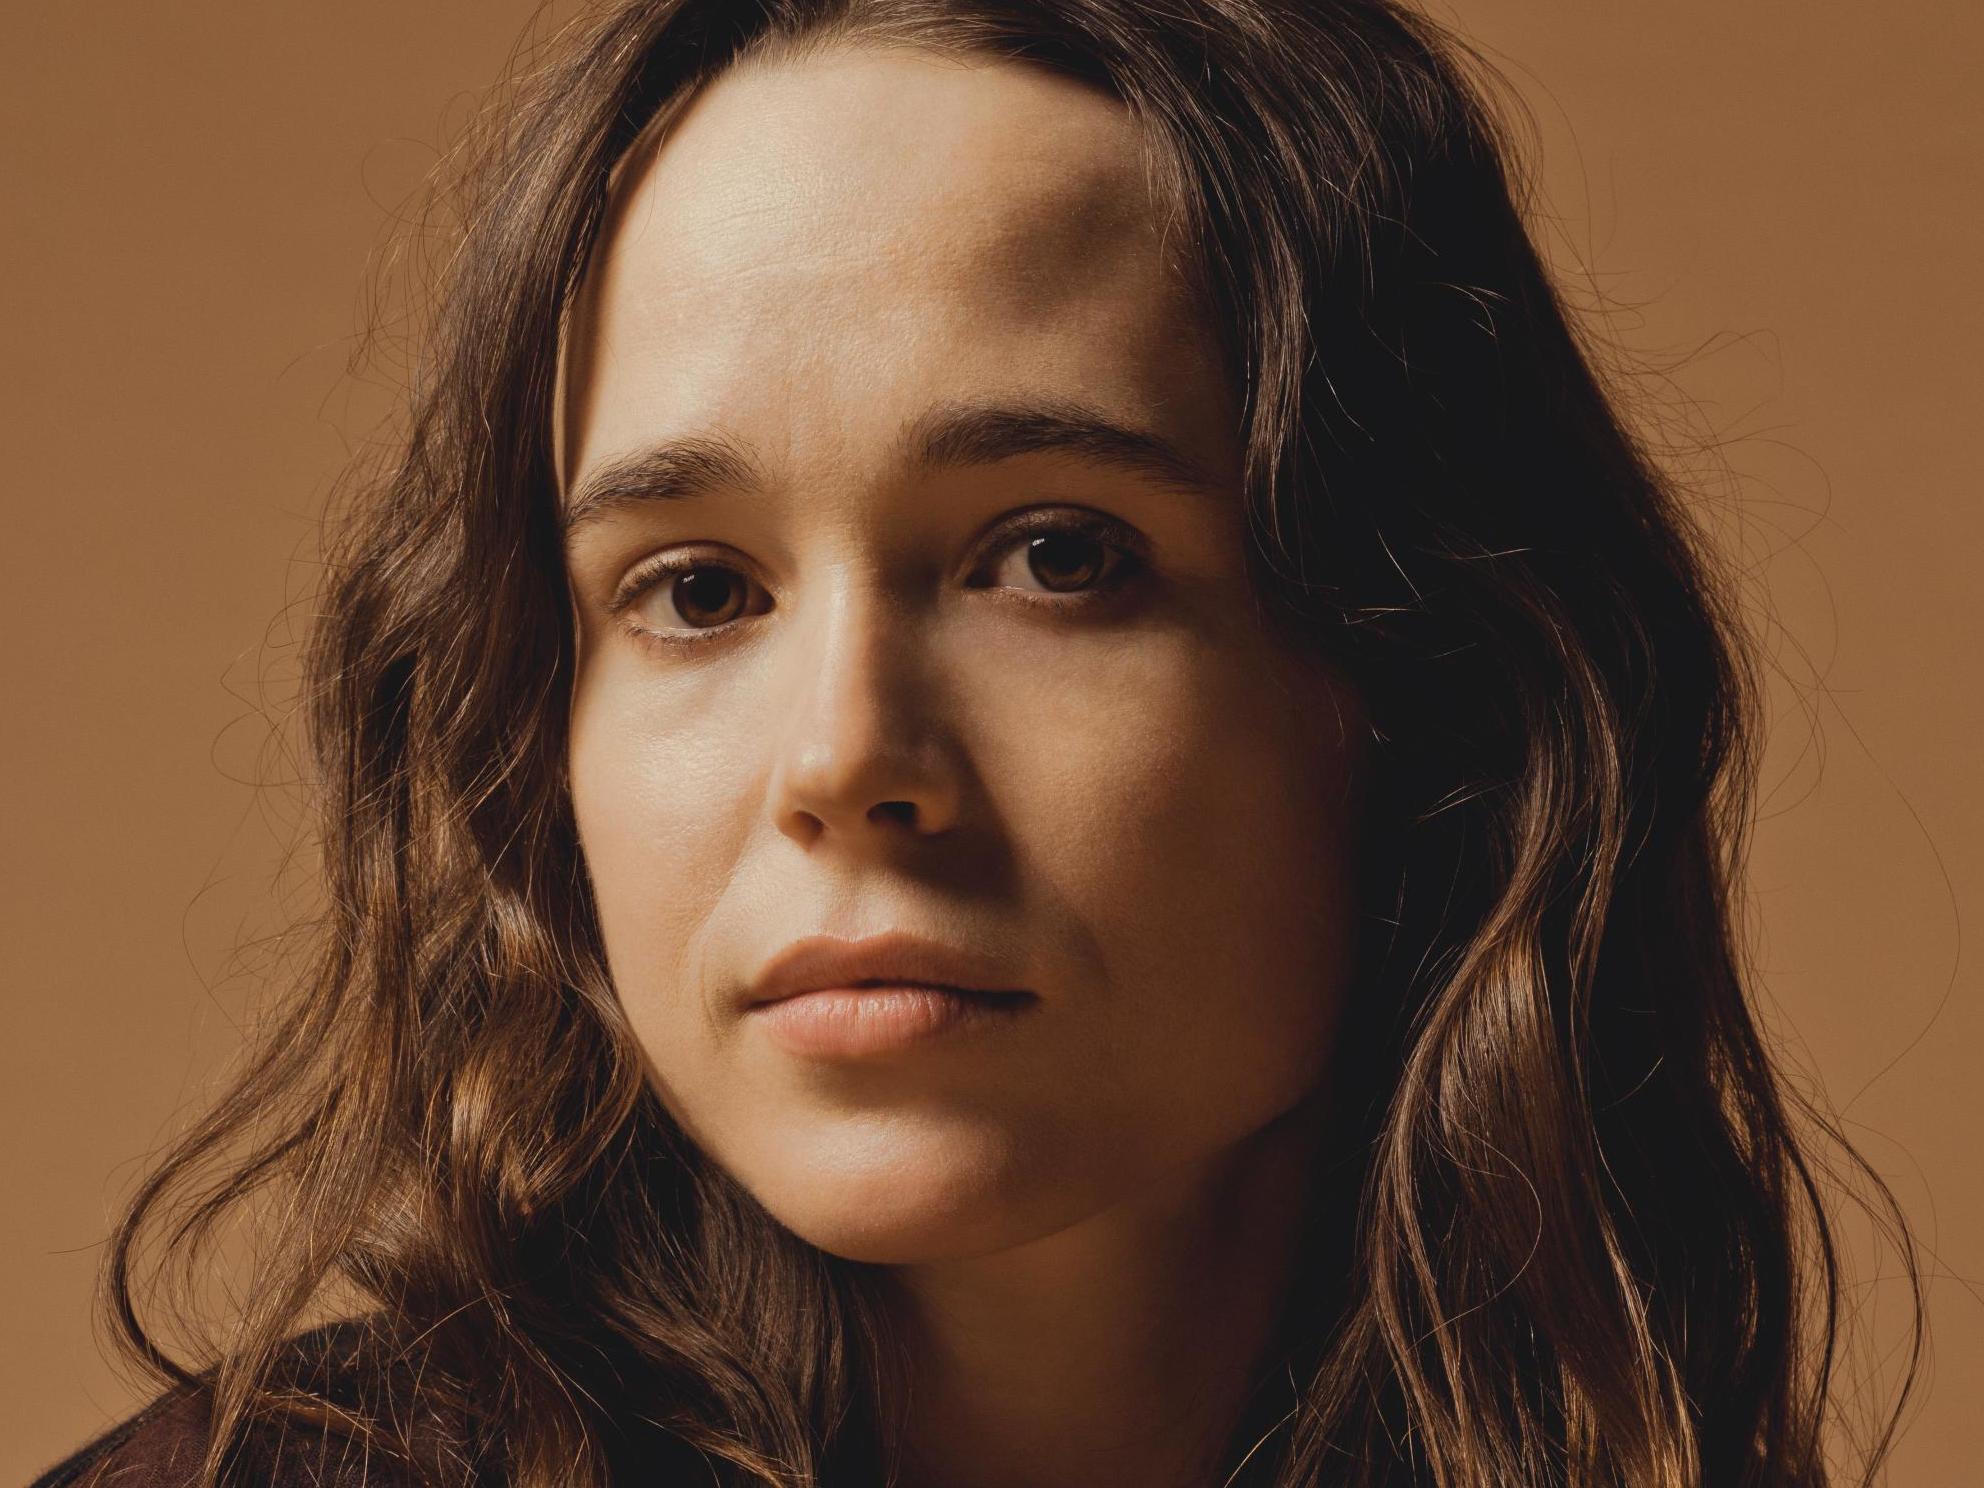 'Coming out cured me of panic attacks': actor Ellen Page